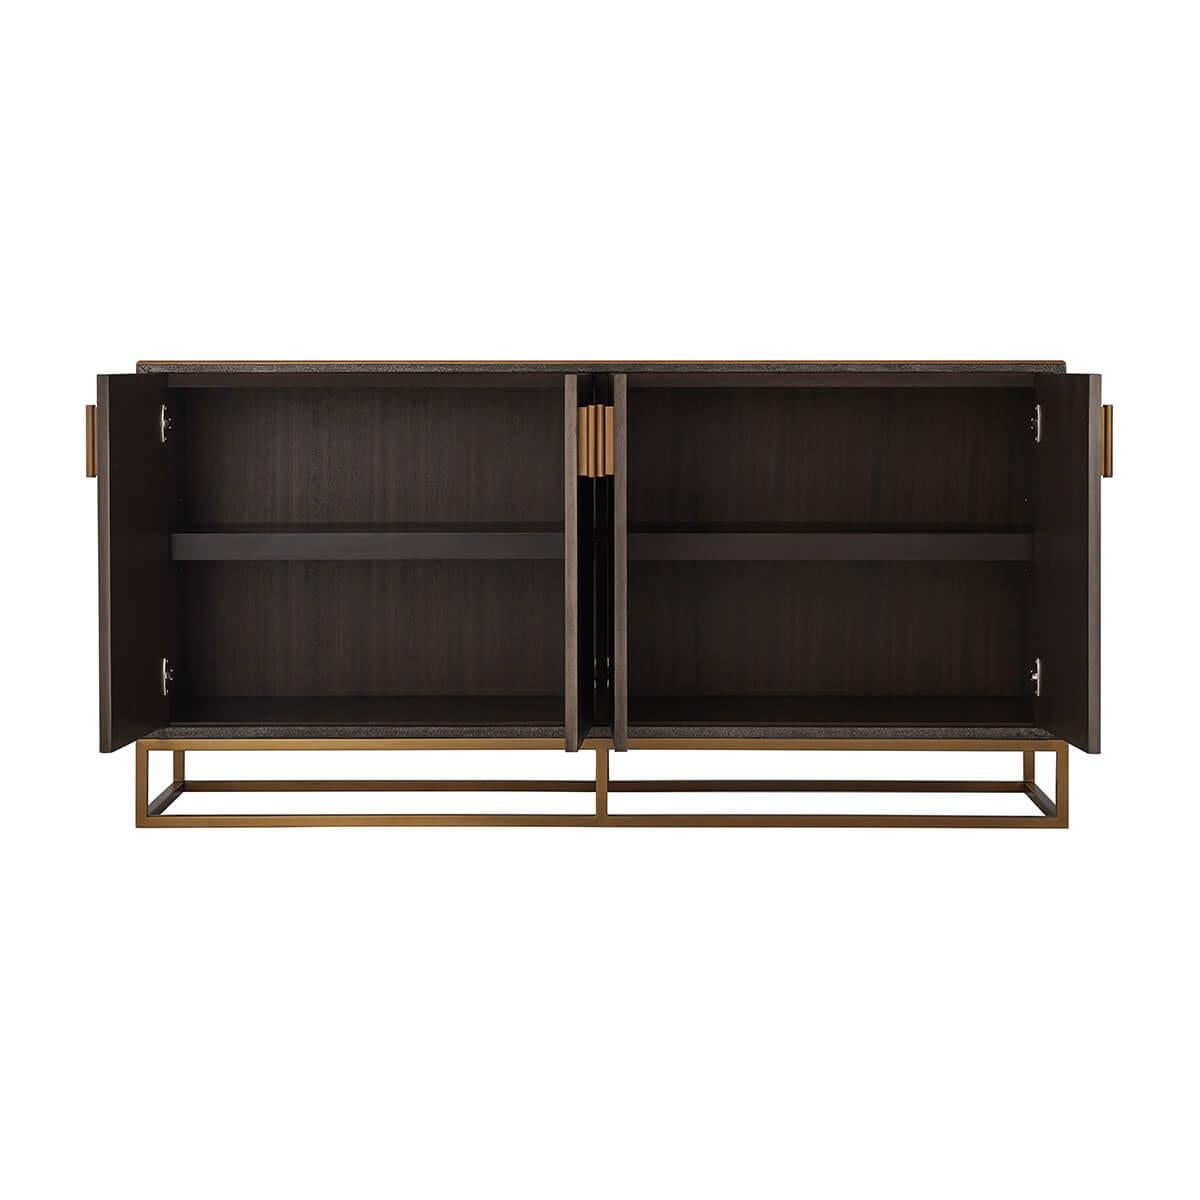 A leather wrapped case, in our dark tempest finish, with four doors, enclosing interior shelves. Having brush brass finished hardware and an open cubed base frame.

Dimensions: 63